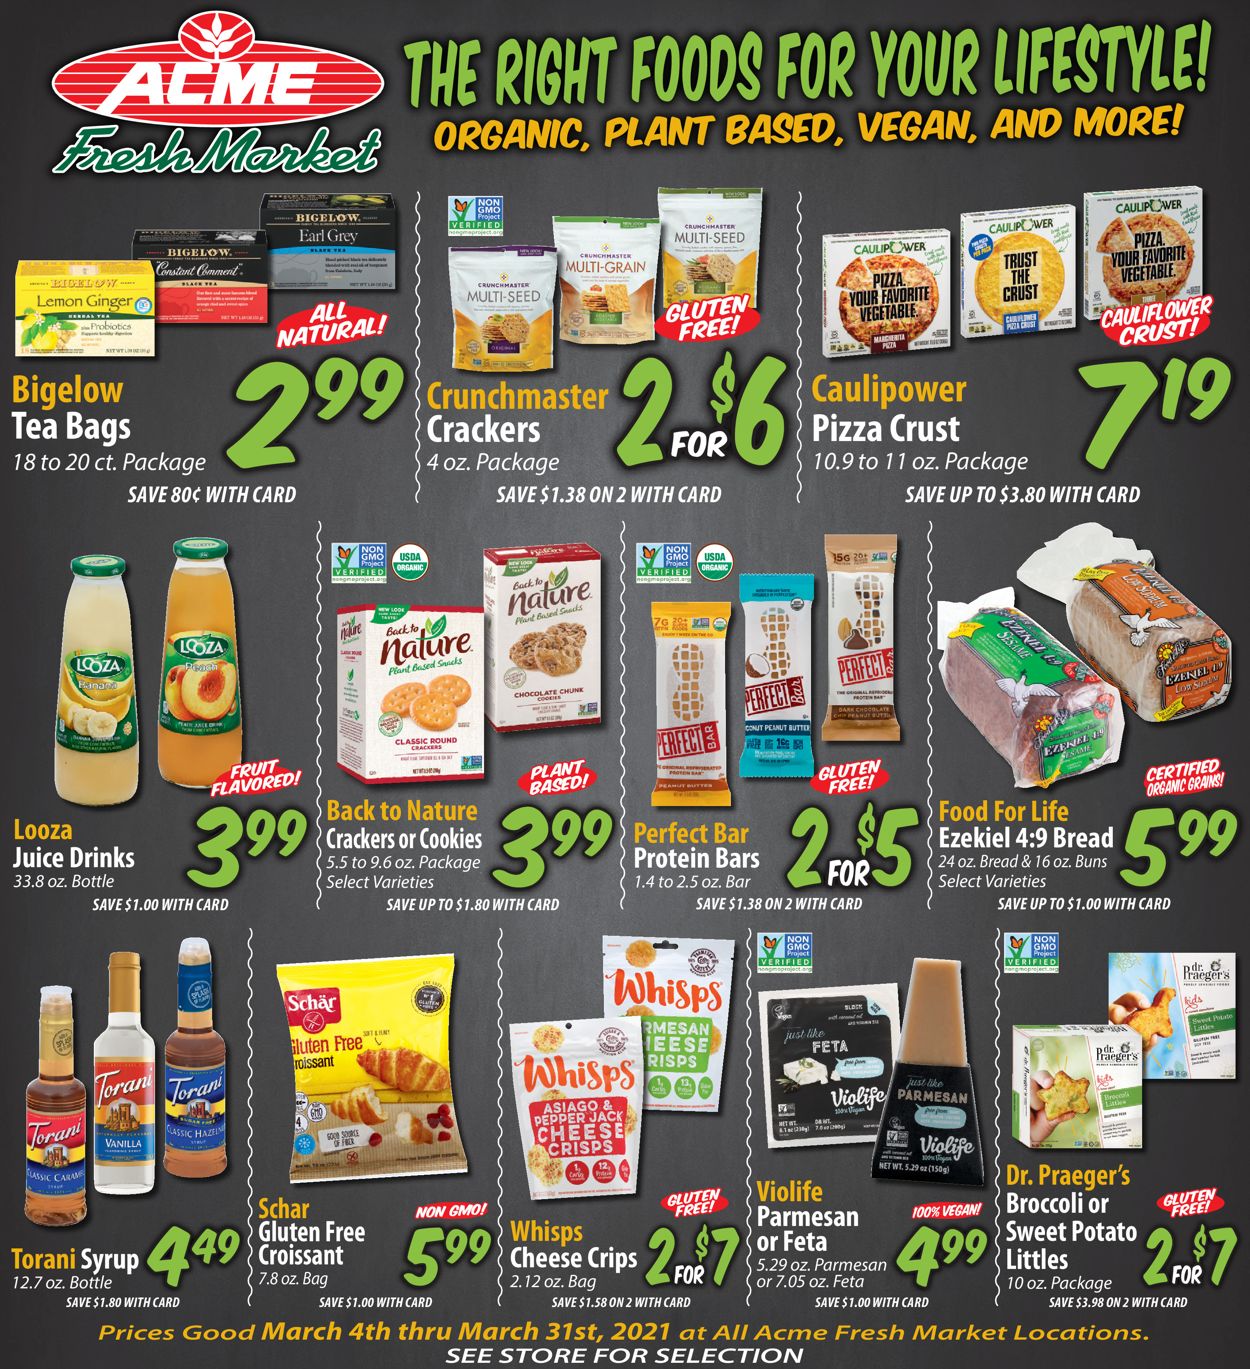 Acme Fresh Market Ad from 03/11/2021